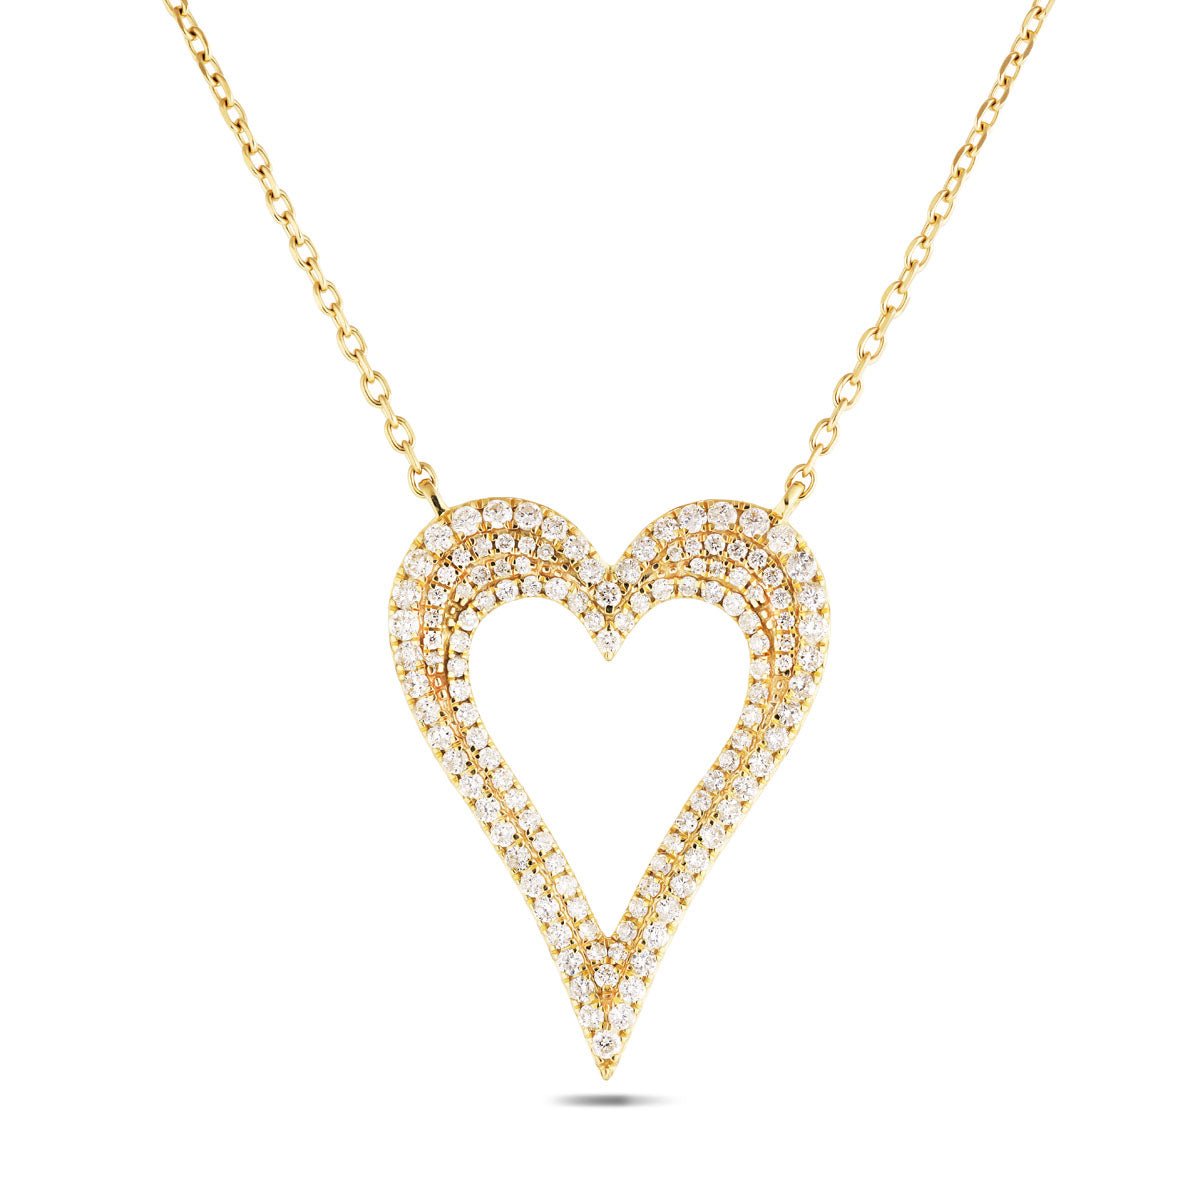 Diamond Heart Pendant Necklace 0.85ct G/SI Quality in 18k Yellow Gold - All Diamond